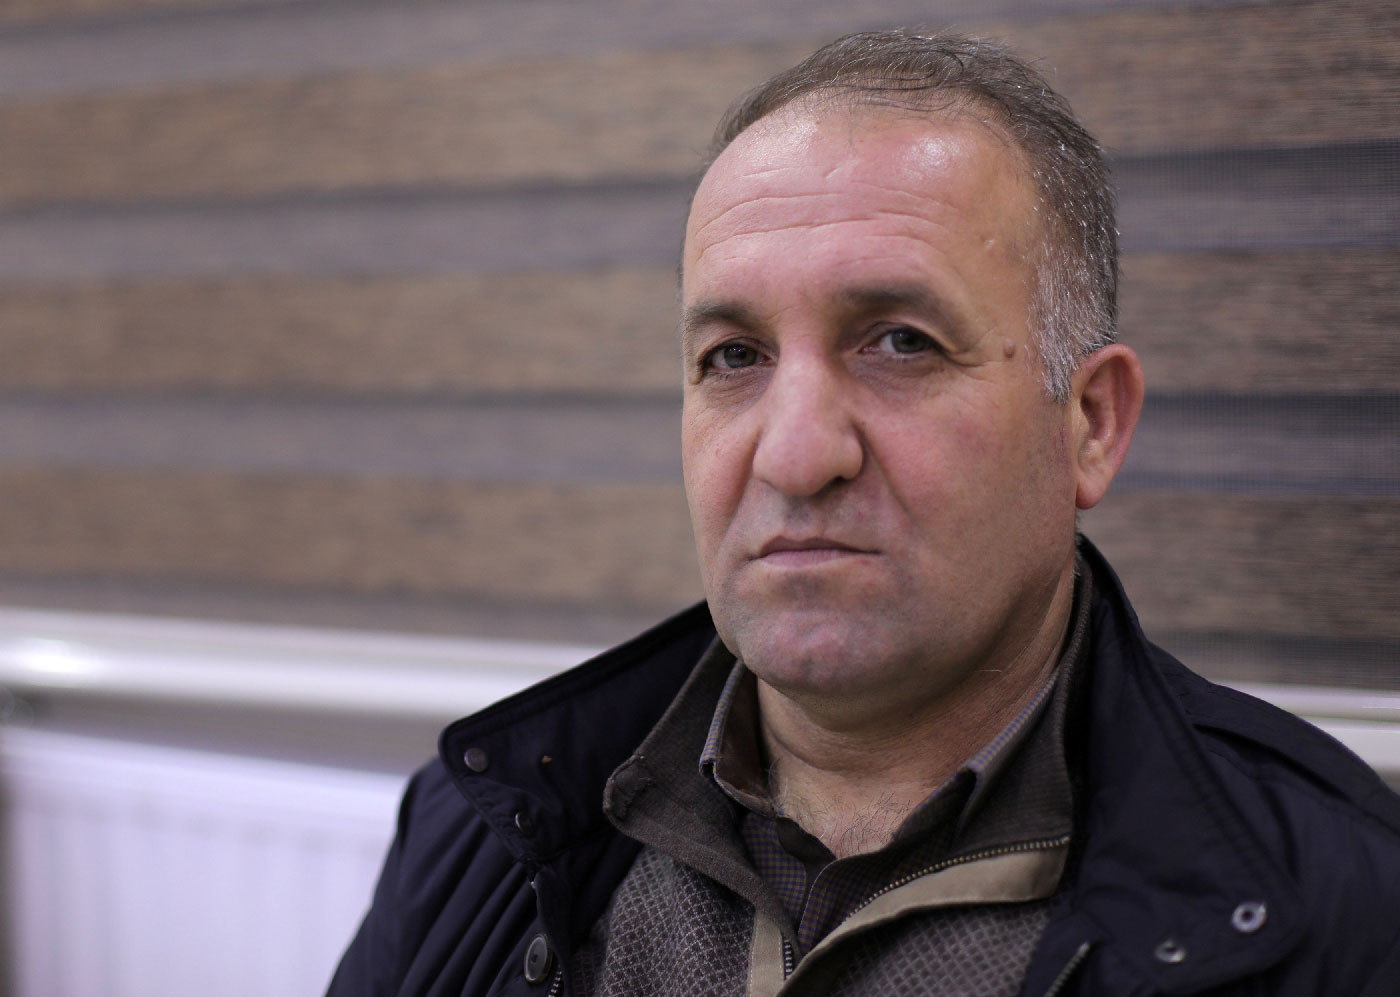 Senior Kurdish official Badran Jia Kurd is pictured during an interview with Reuters, in Qamishli, Syria January 3, 2019.